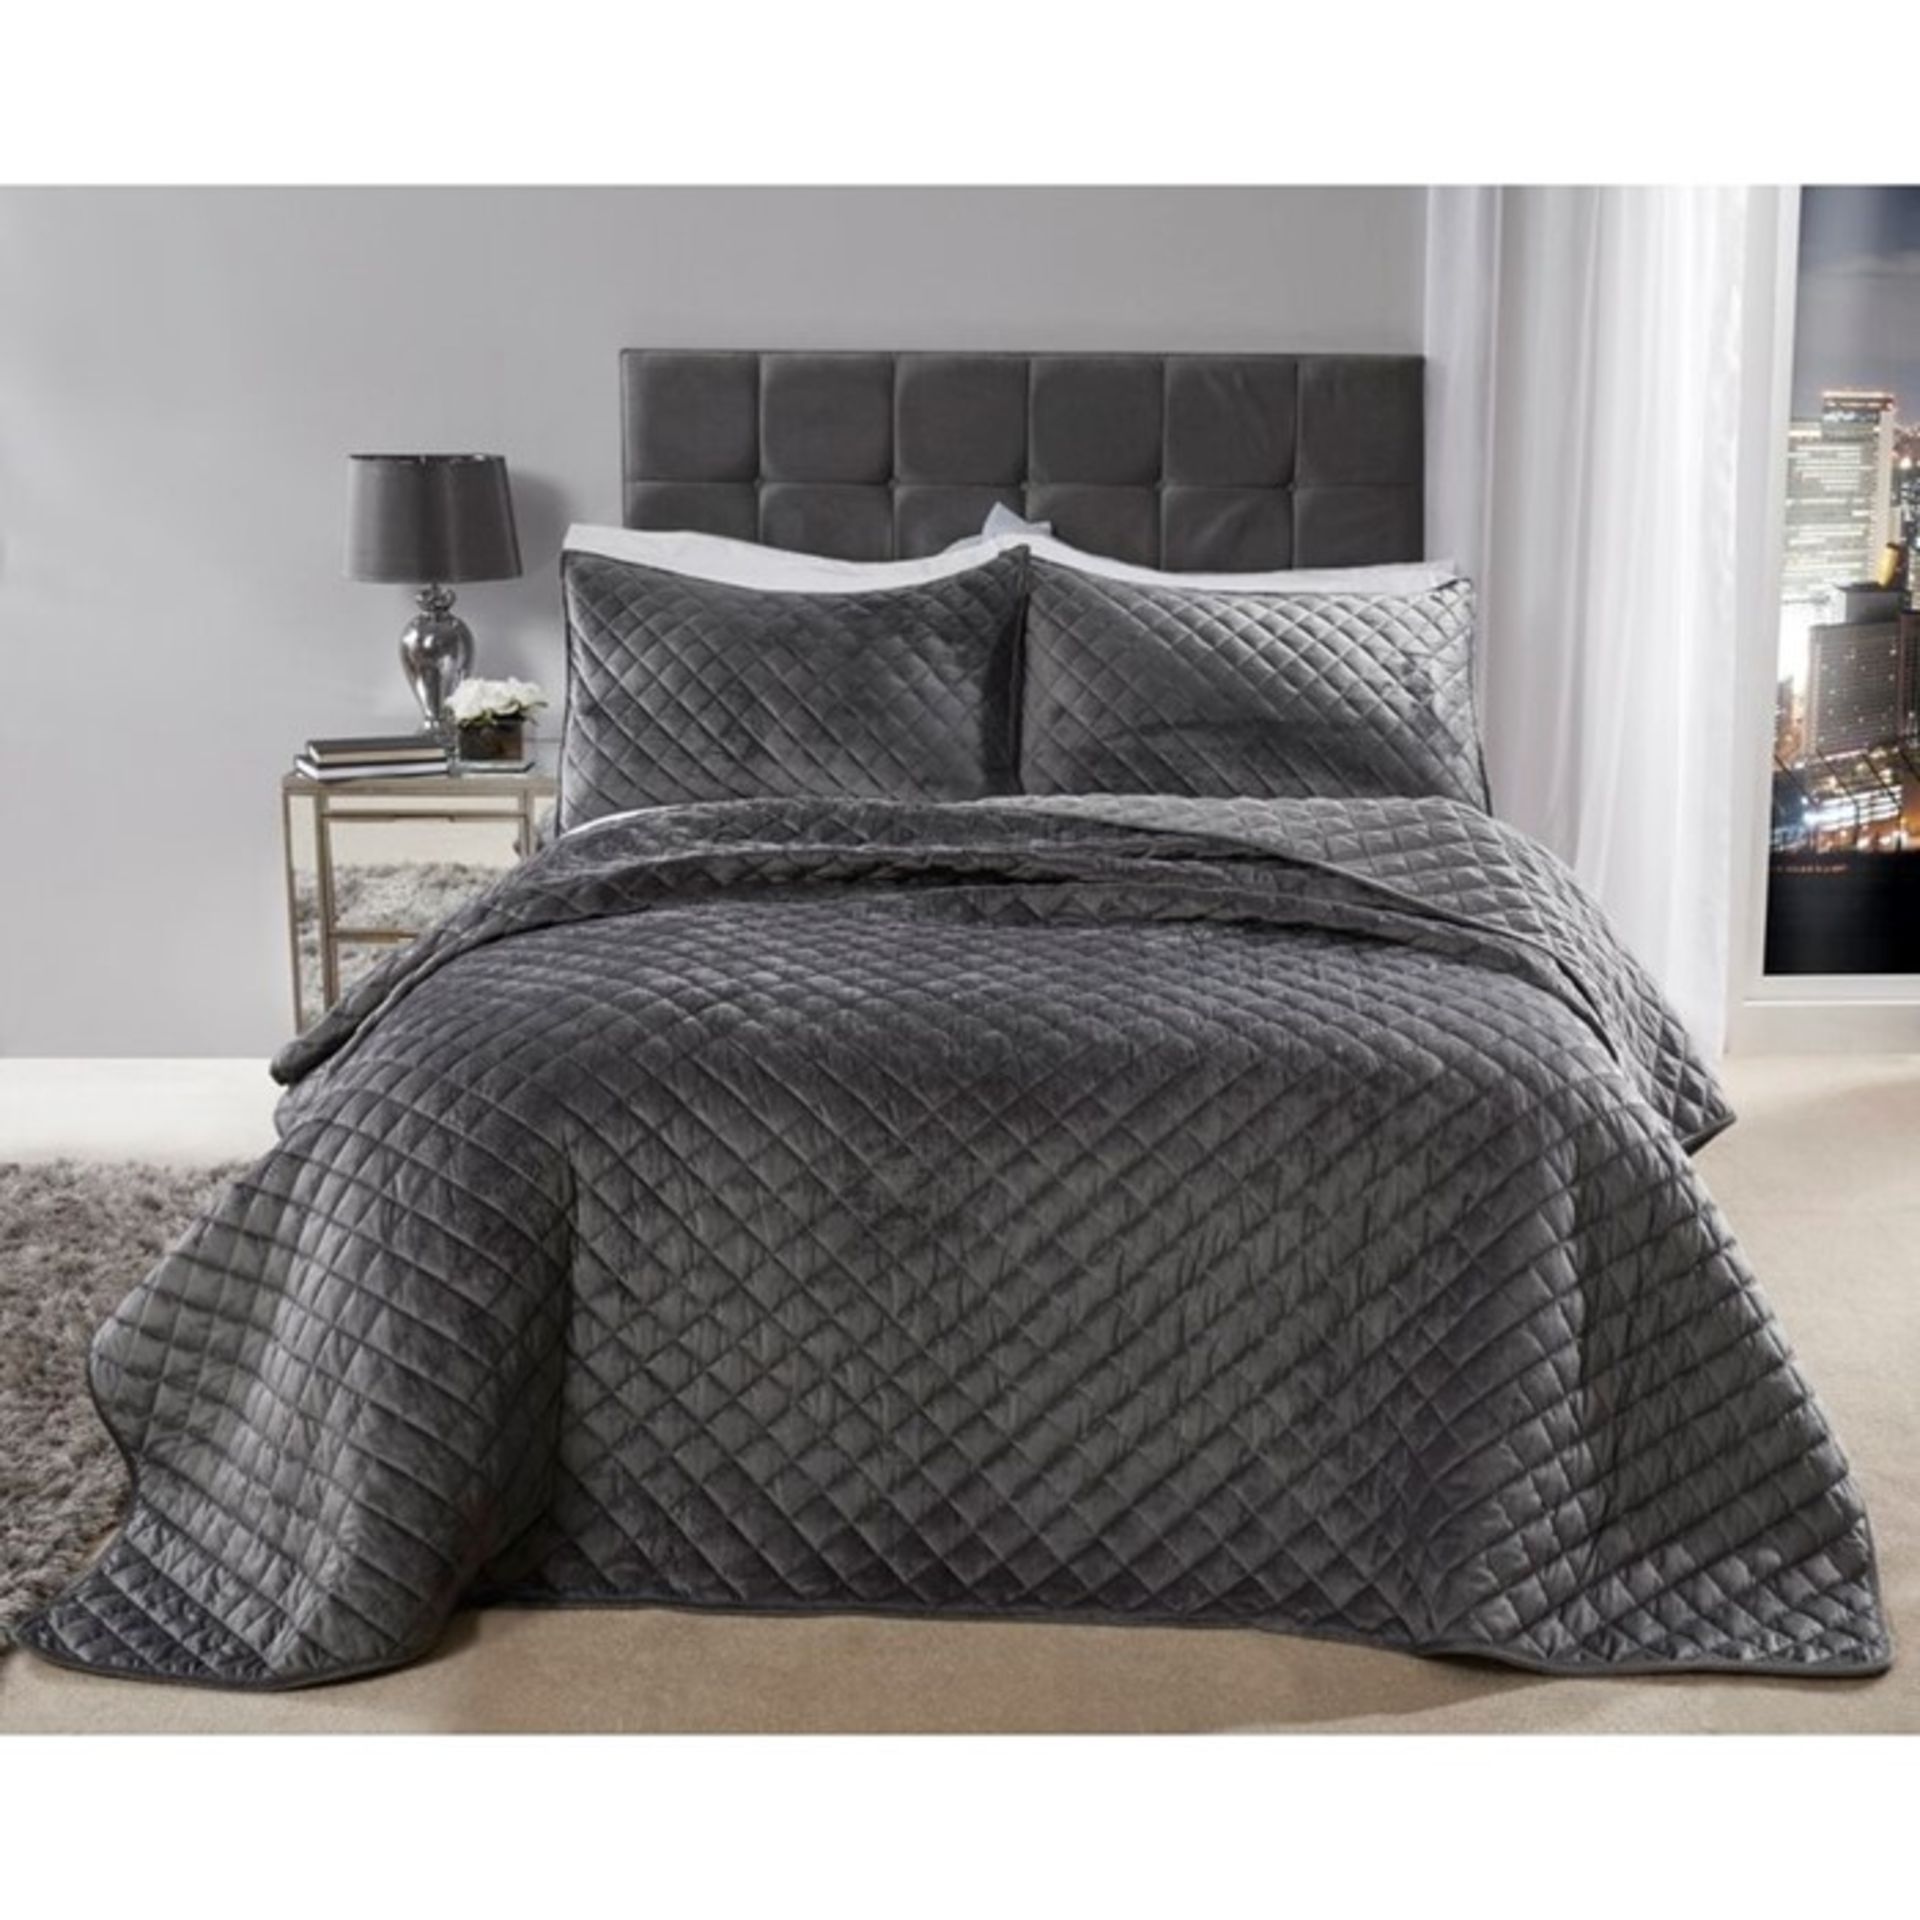 Ophelia & Co., Alyn Bedspread Set with 2 Pillow Covers (SILVER)(220X240CM) - RRP £69.99 (